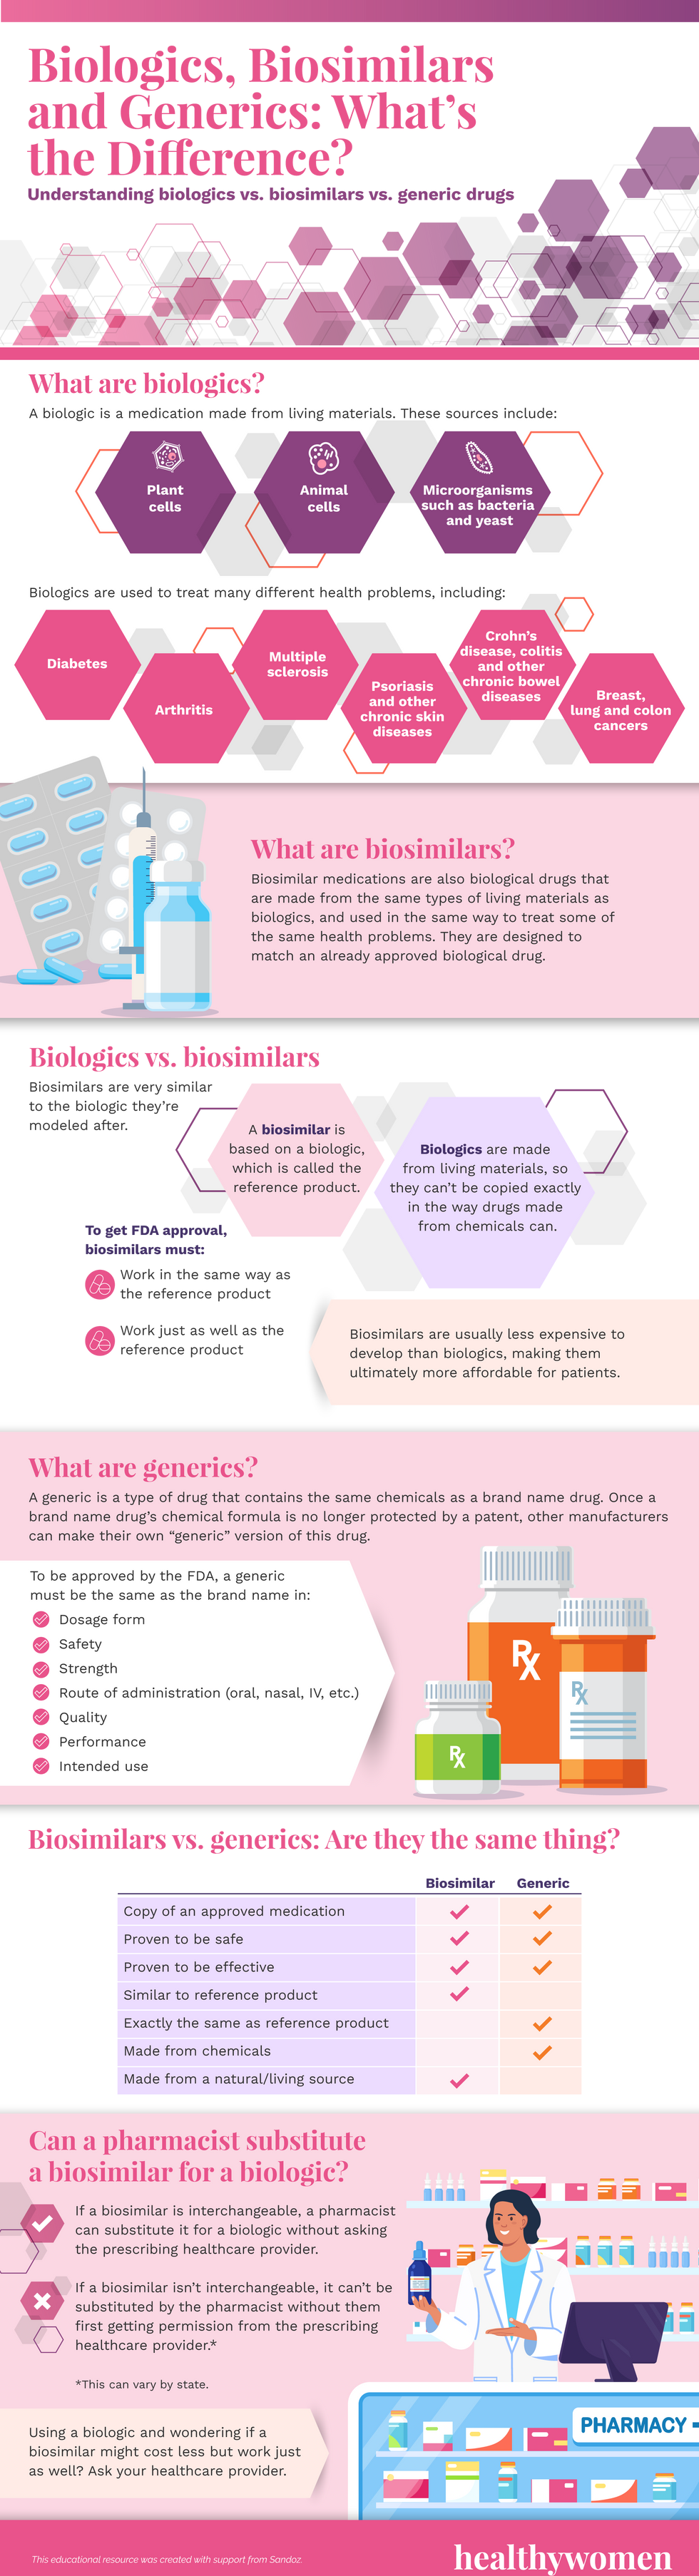 Biologics, Biosimilars and Generics: What\u2019s the Difference? Infographic. Click image to view PDF